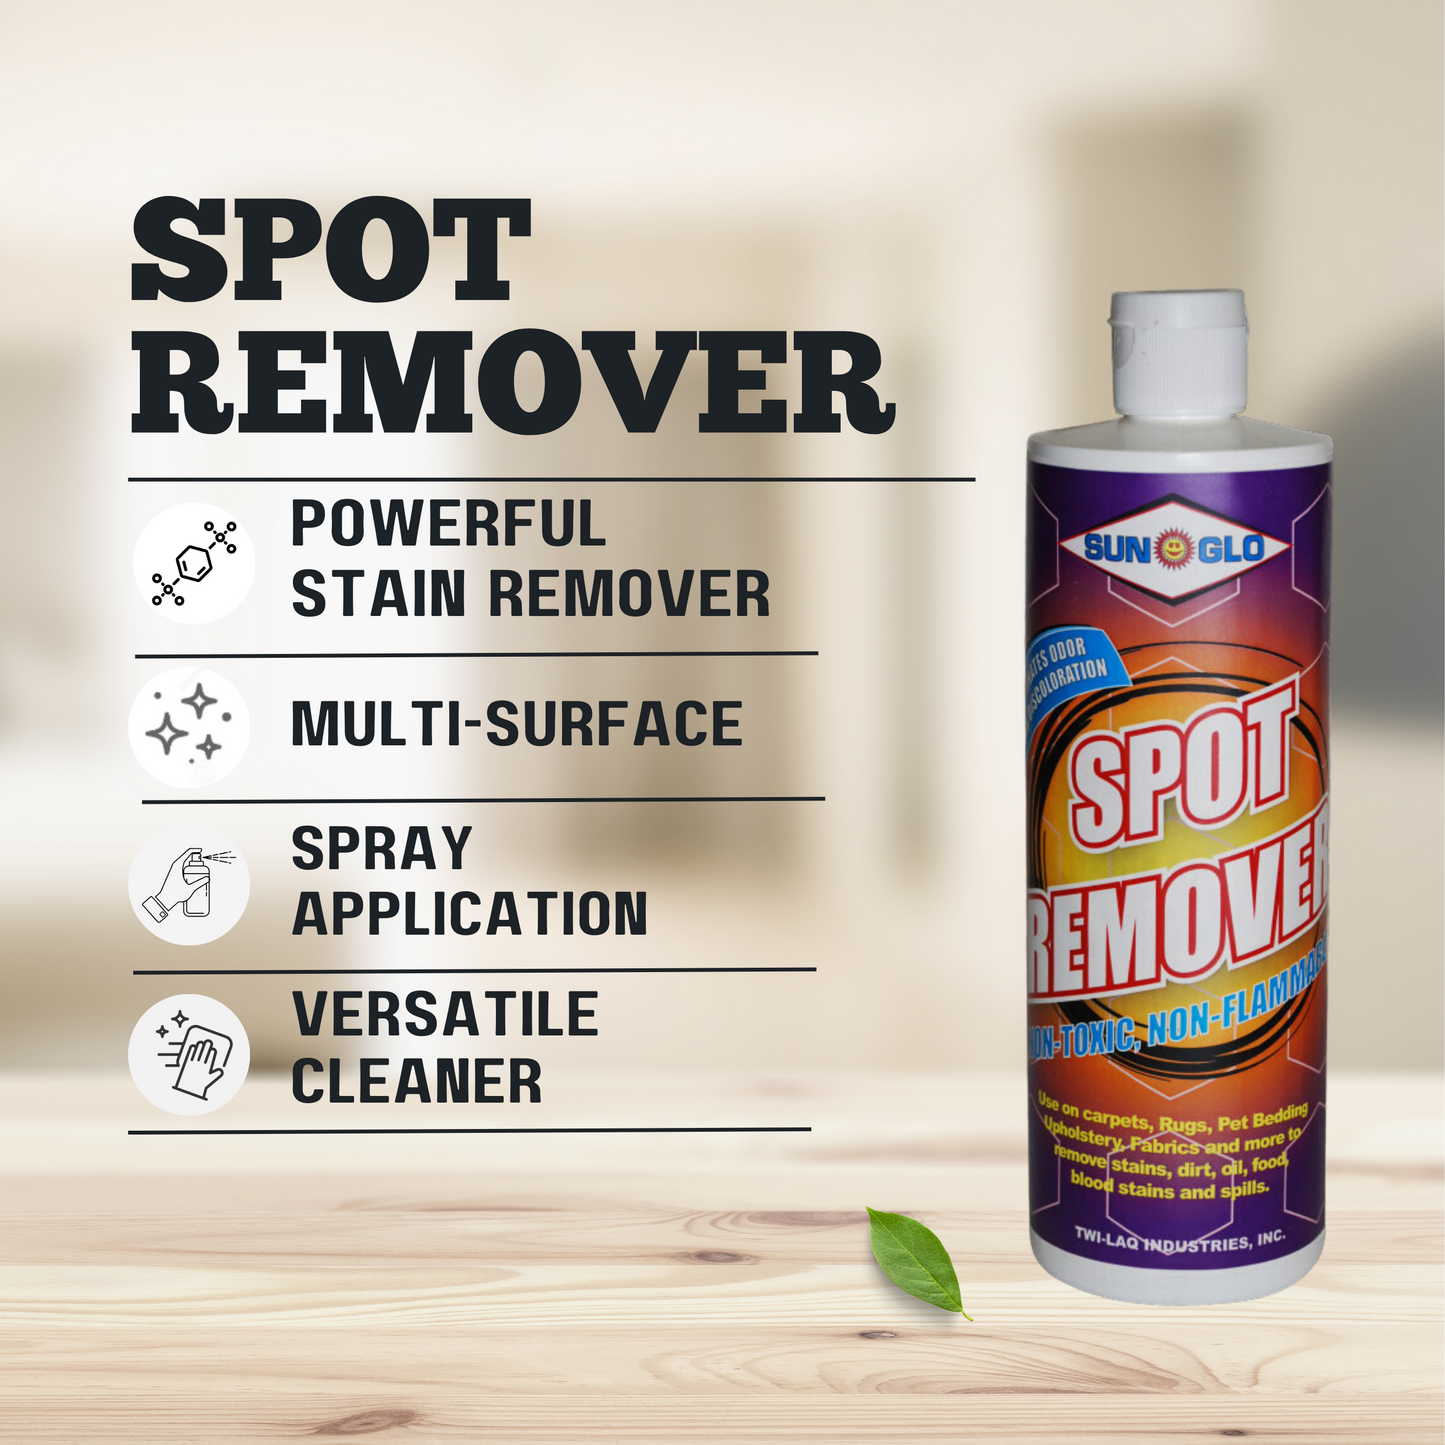 SUN-GLO Spot Remover – Your Ultimate Carpet Cleaner Solution and Carpet Stain Remover In One Powerful Formula (12-Pack, 16 oz. each)